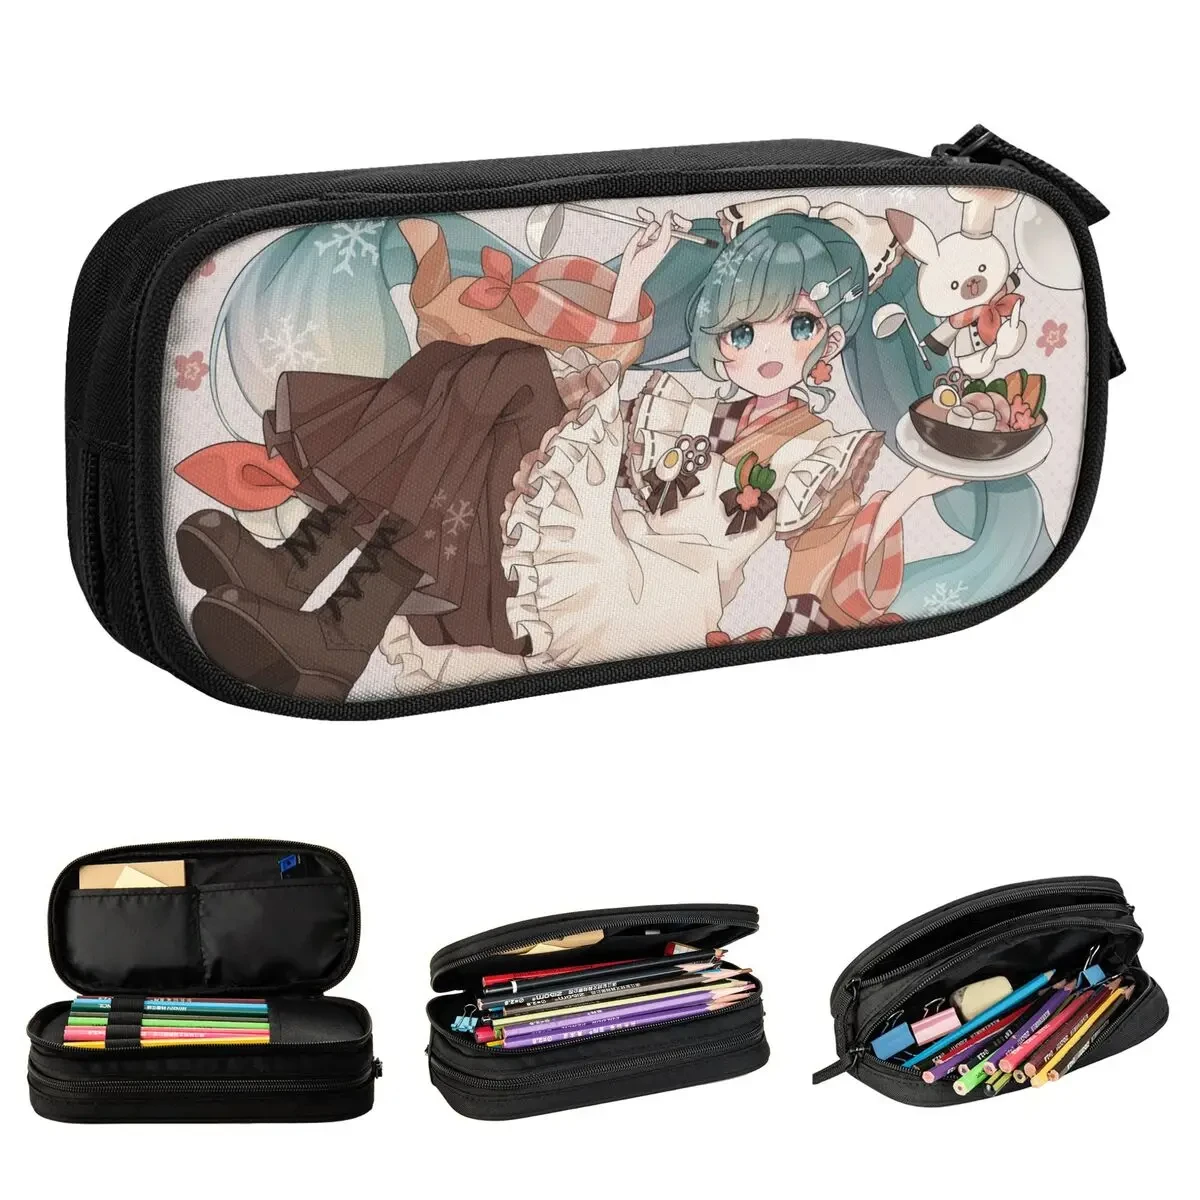 

VOCALOID Anime Pencil Cases Hatsune Miku Pen Holder Bag Girls Boys Large Storage Office Cosmetic Pencilcases Teens Girls